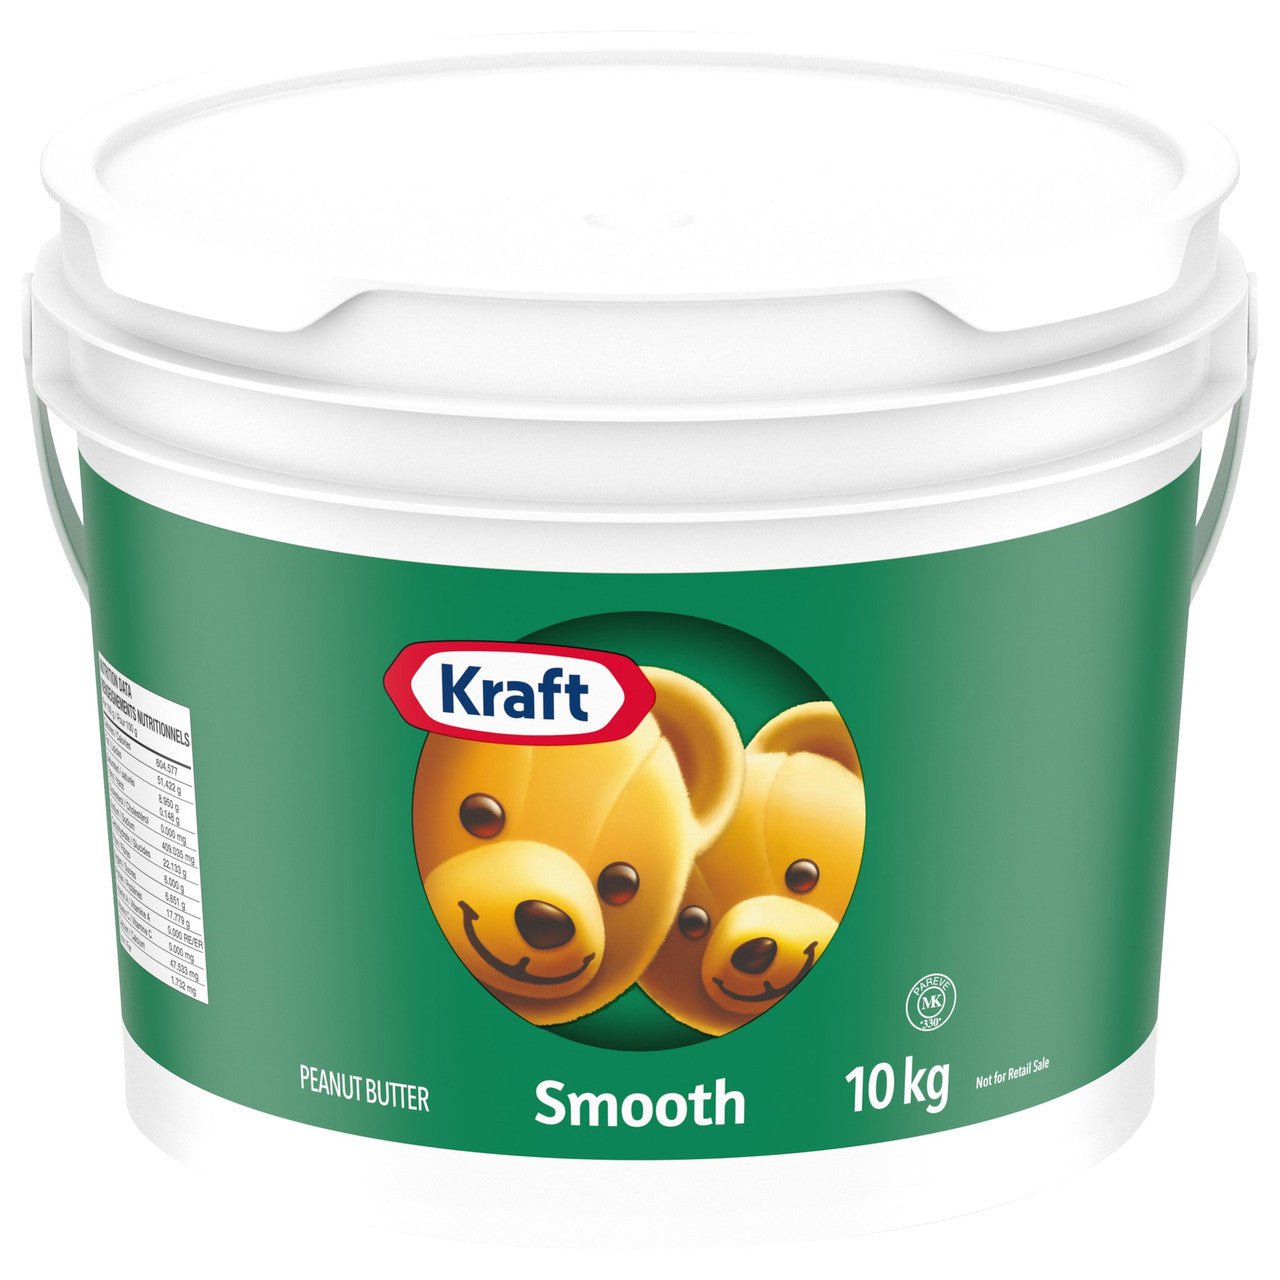 Kraft Peanut Butter Smooth 10kg/22.05 Pounds {Imported from Canada}